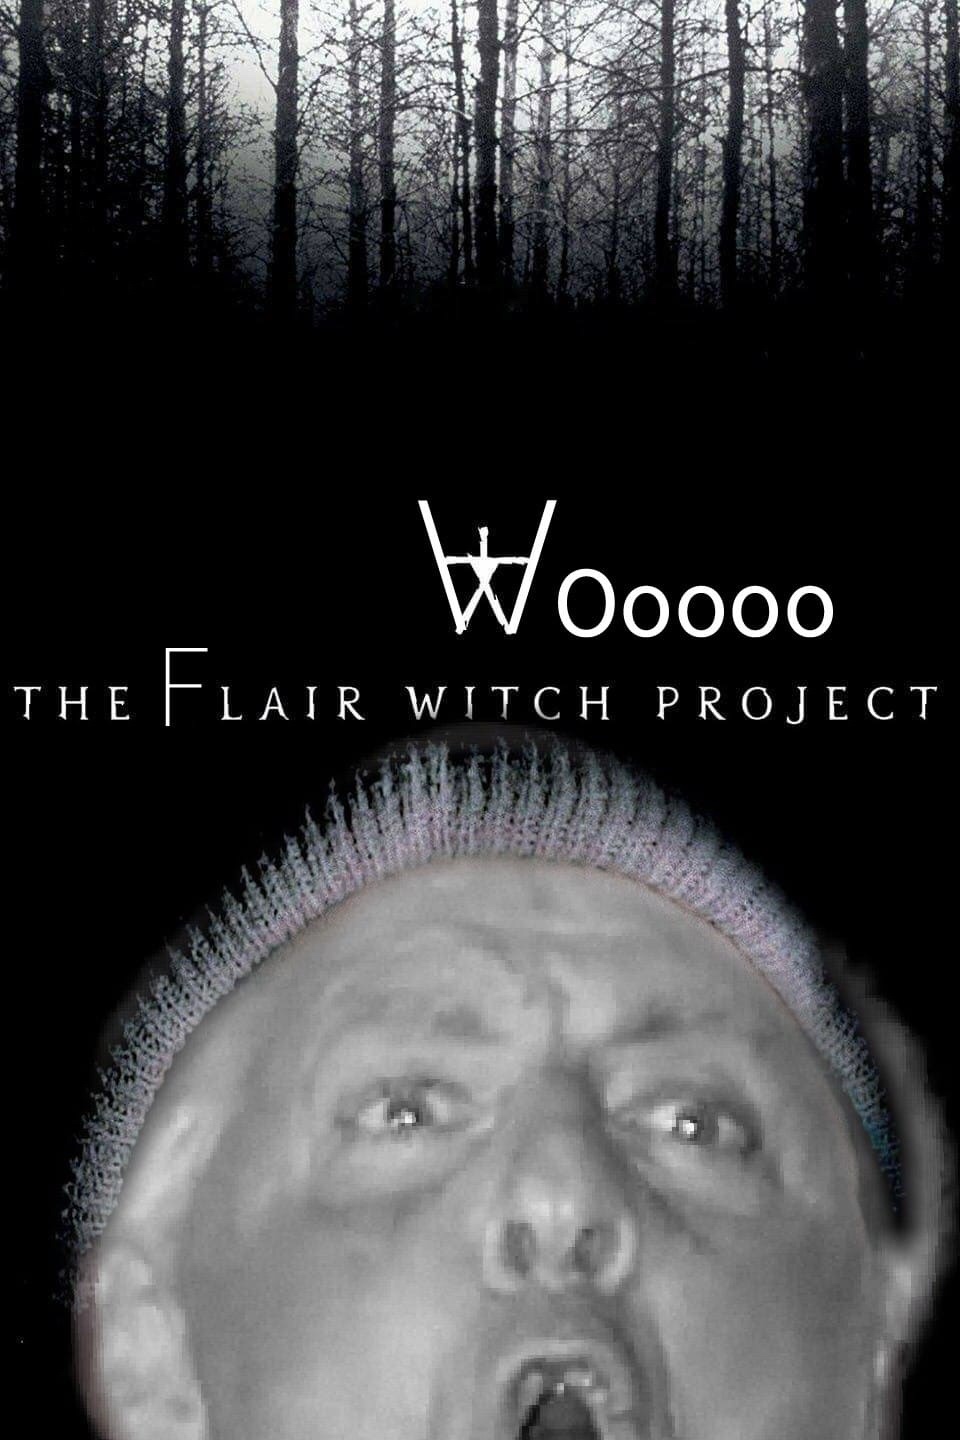 blair witch project cover - W00000 The Flair Witch Project